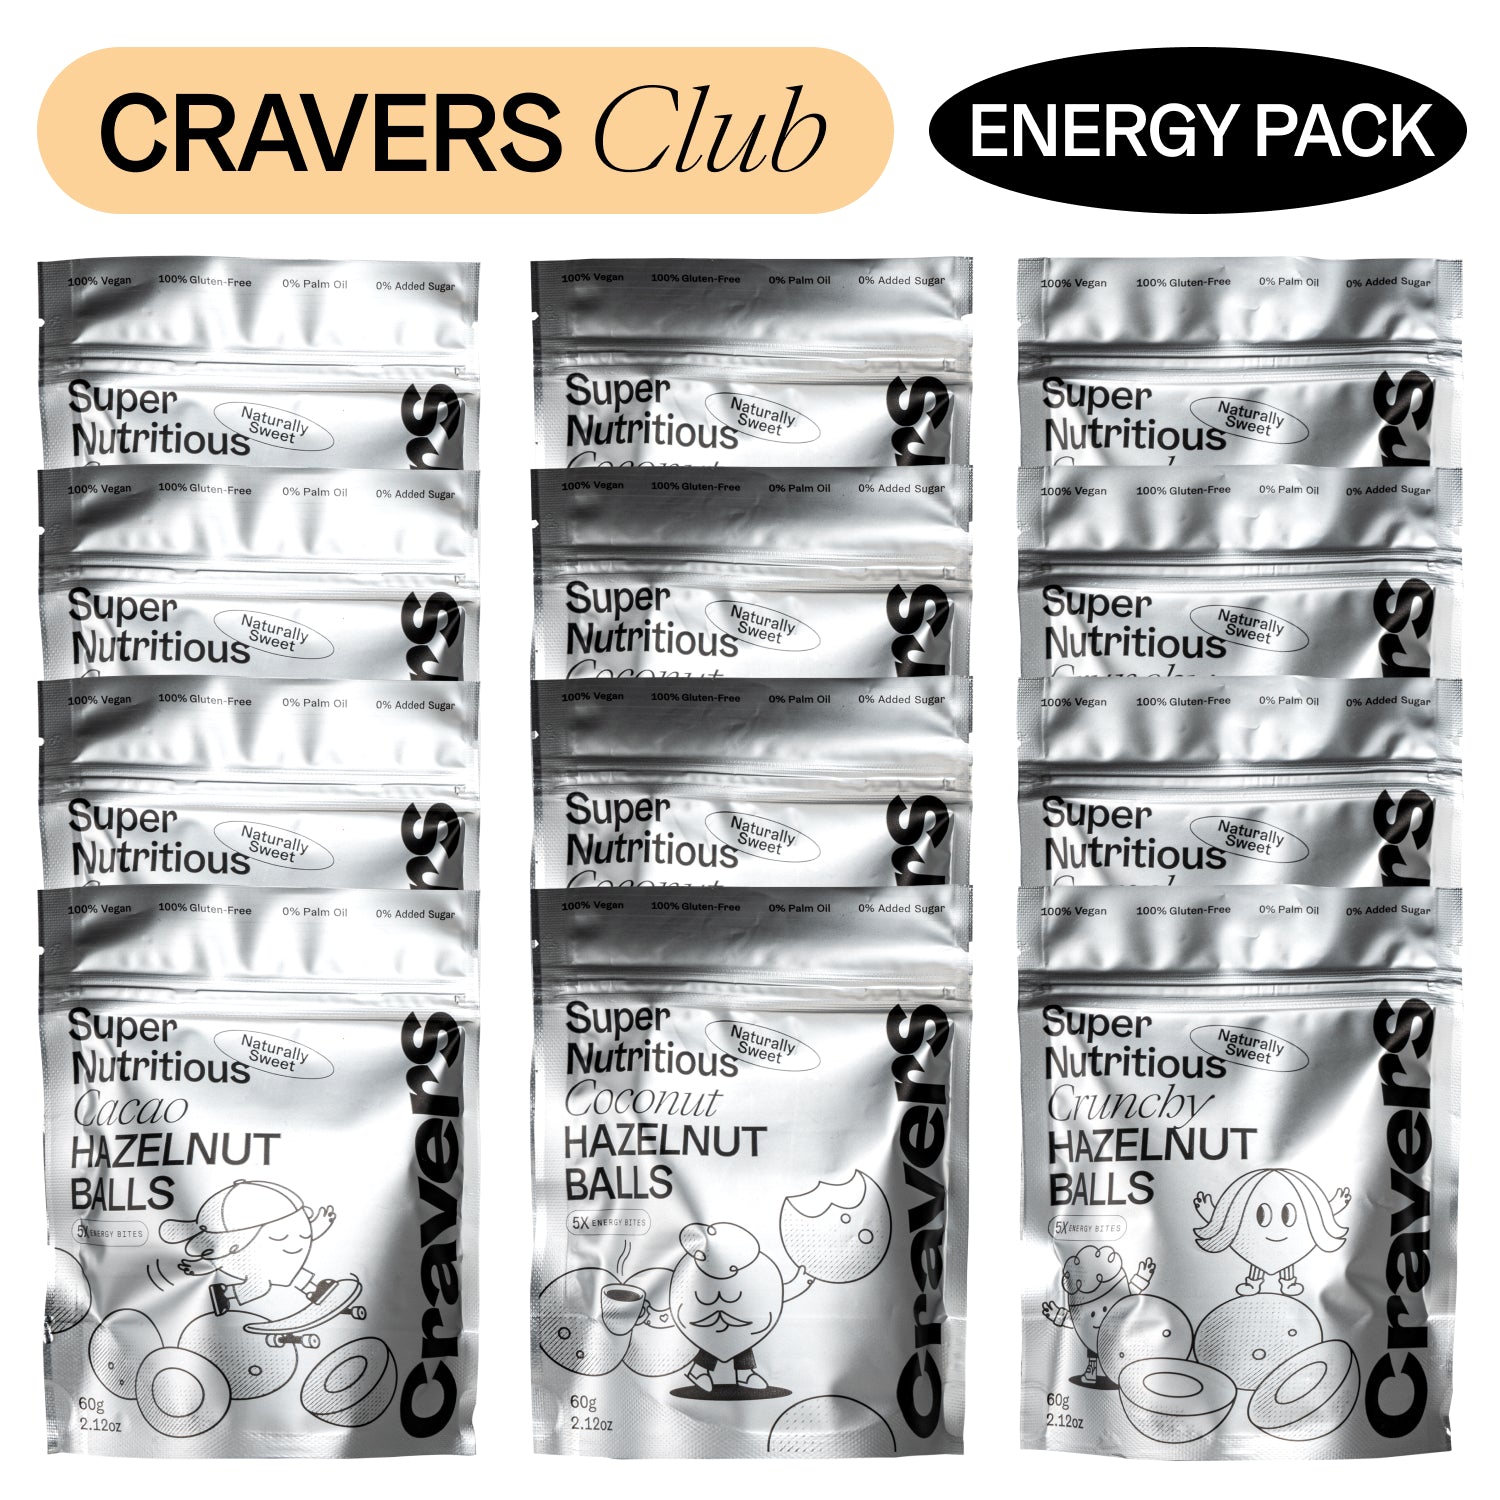 CRAVERS Energy Pack